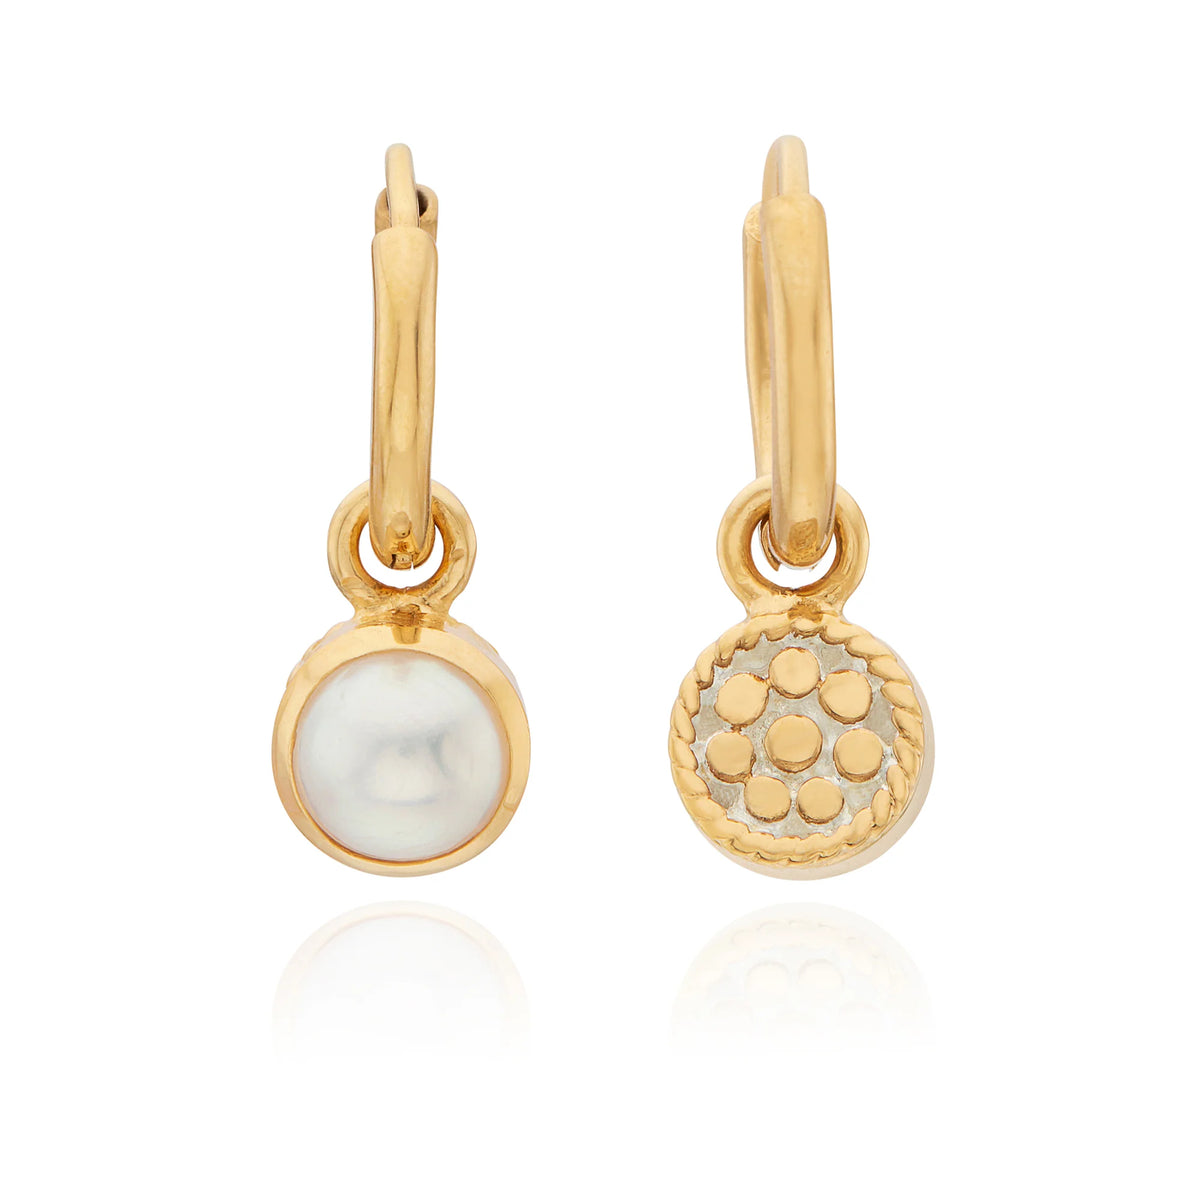 Gold hoops with reversible pearl or gold dotted pendant 